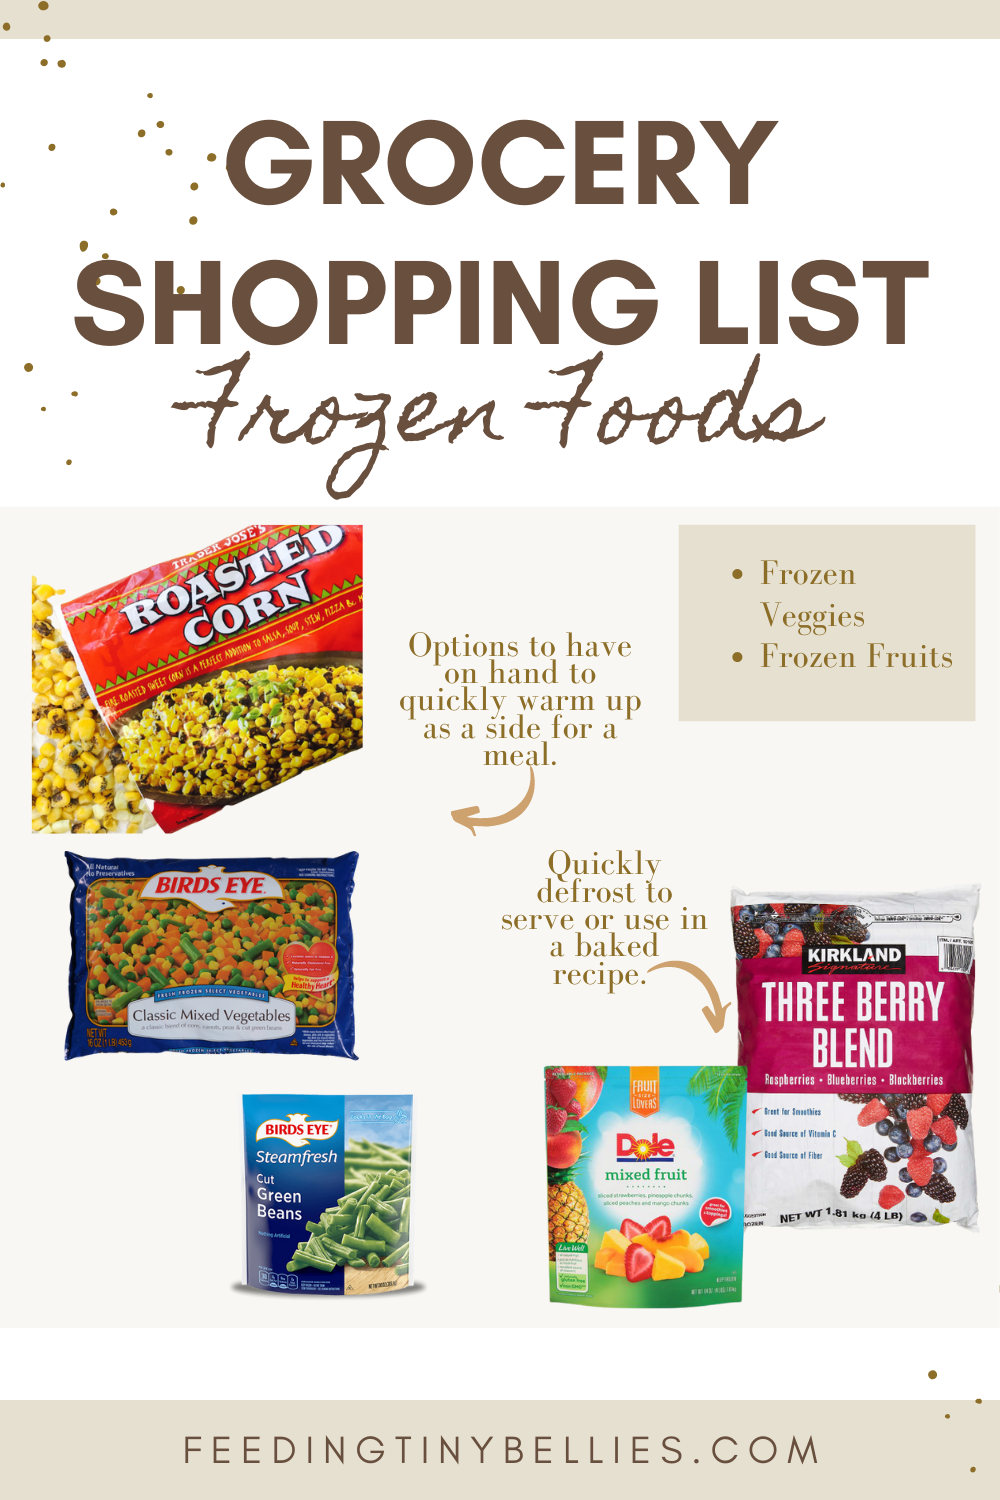 Ultimate Grocery Shopping List For Baby-led Weaning And Toddler